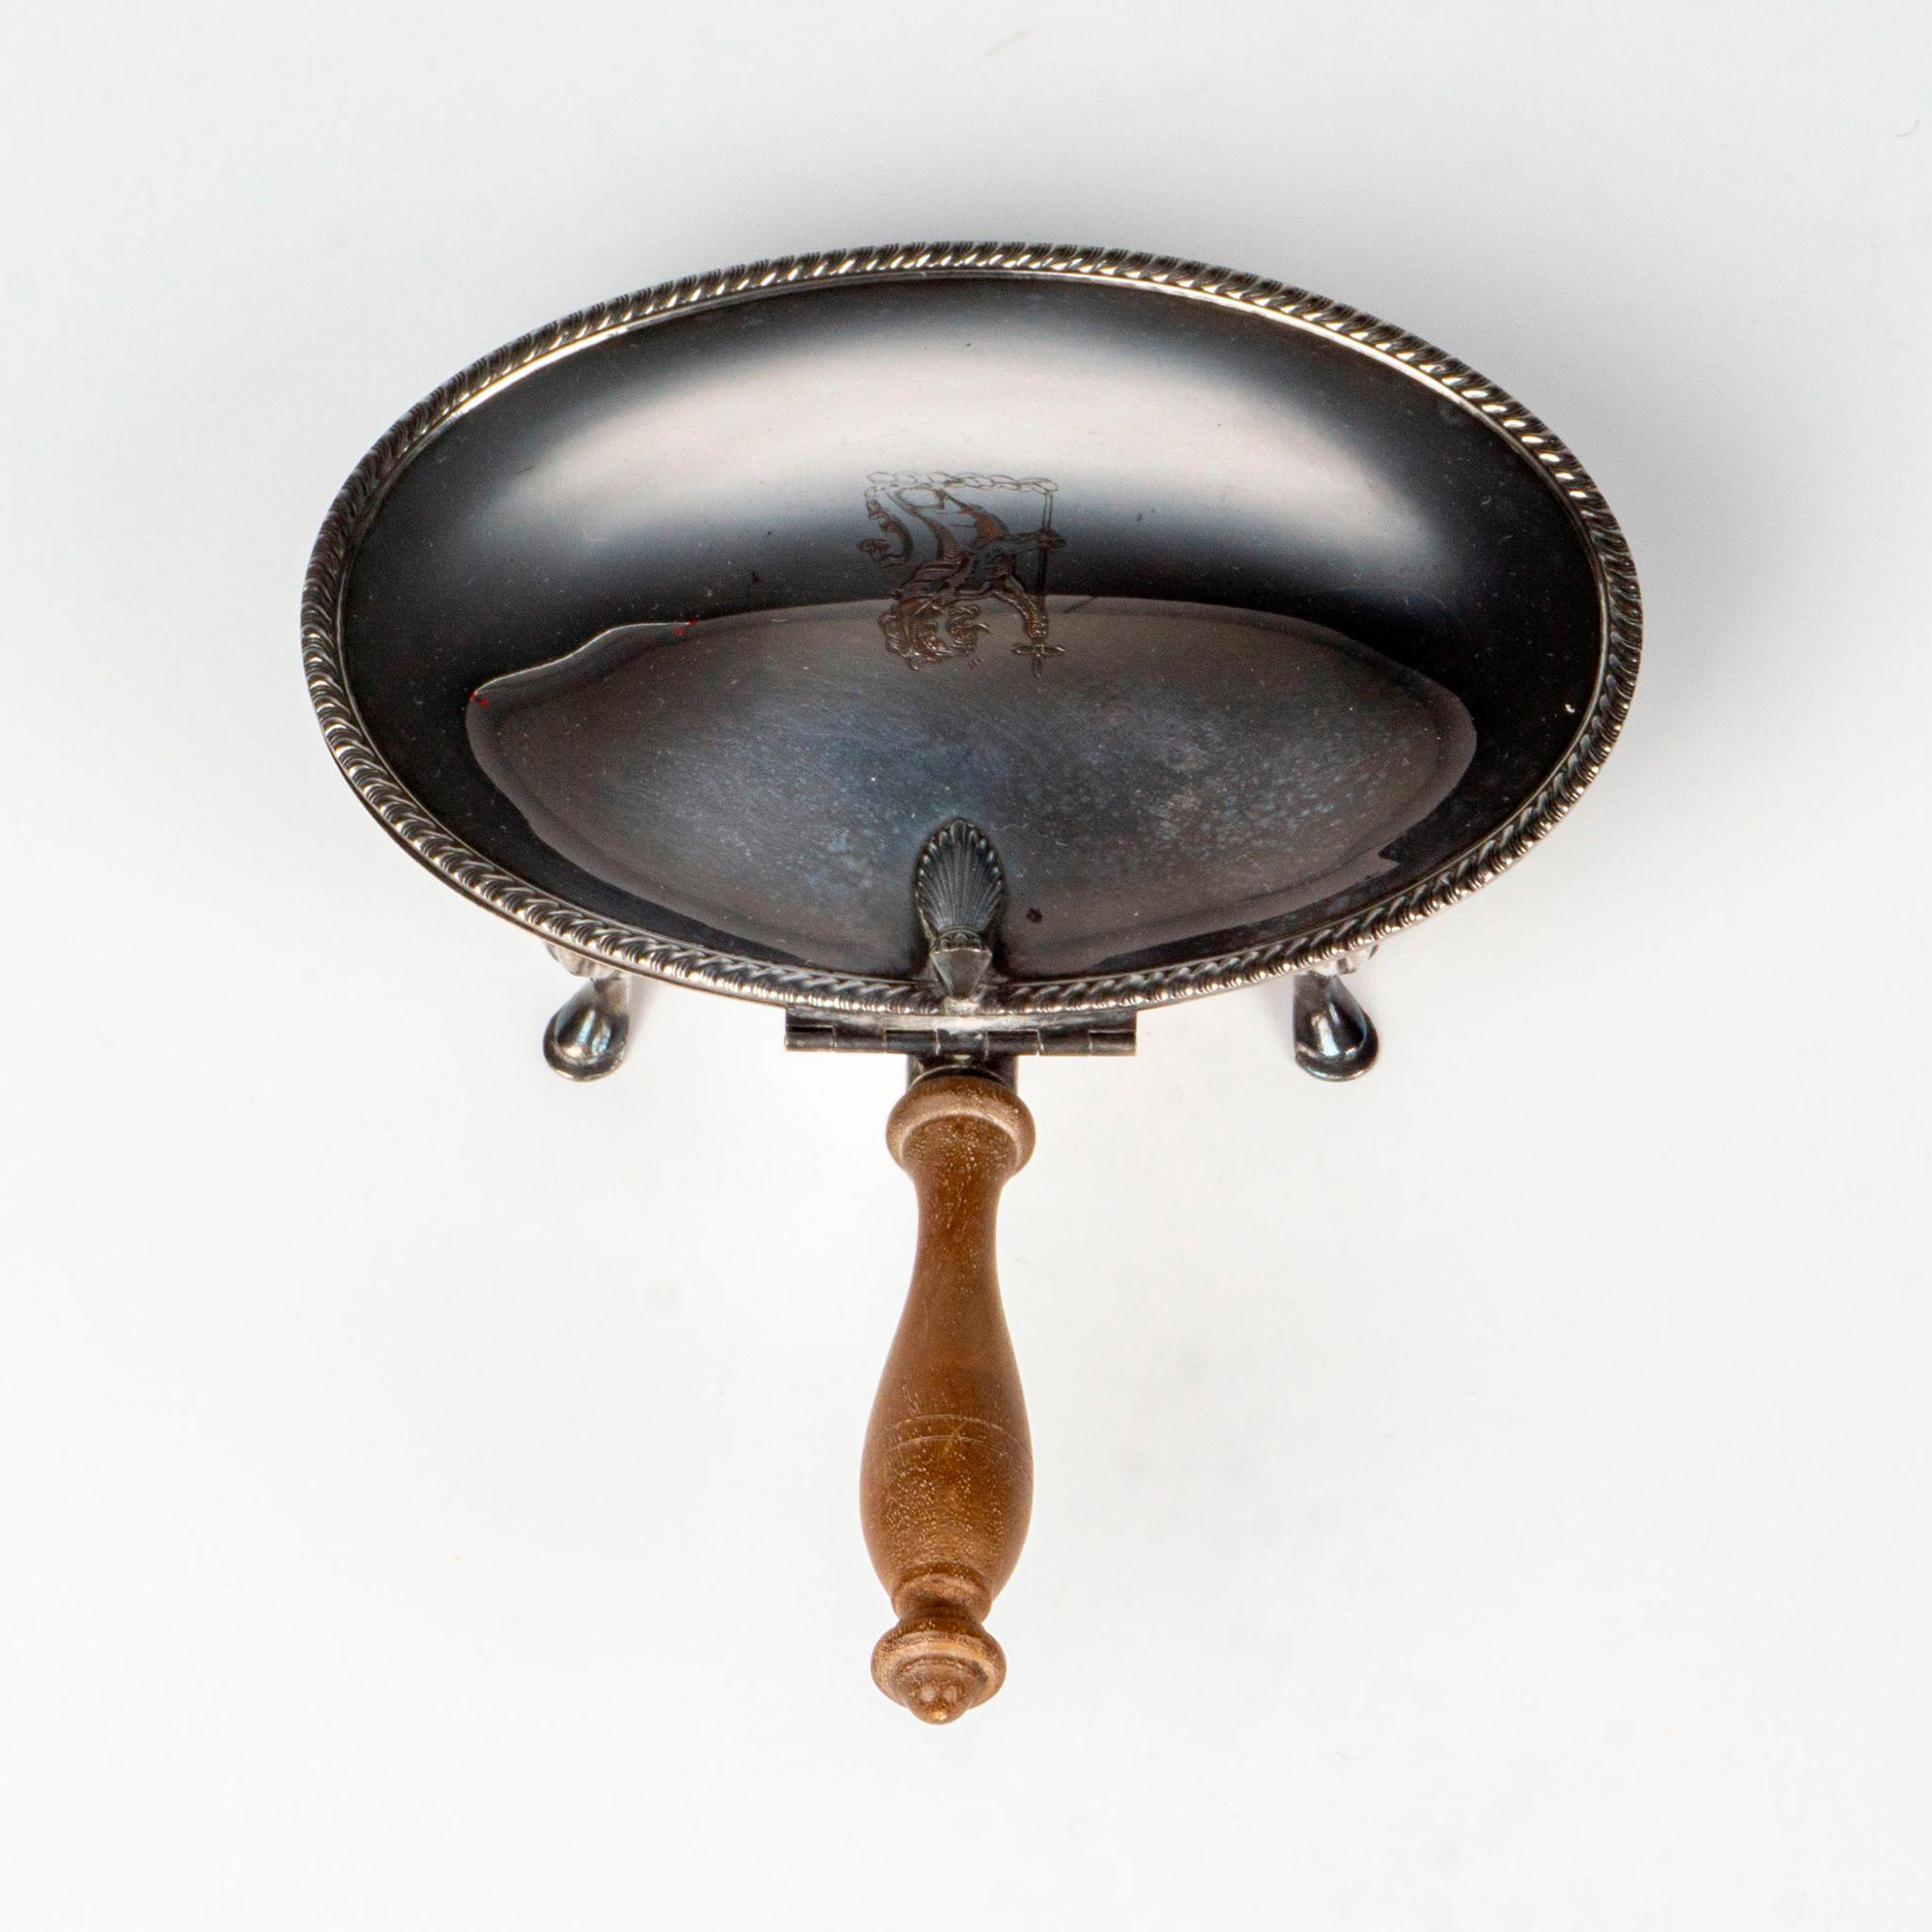 Crescent Silverware Mfg. Co. Silent Butler Serving Dish - Image 2 of 3